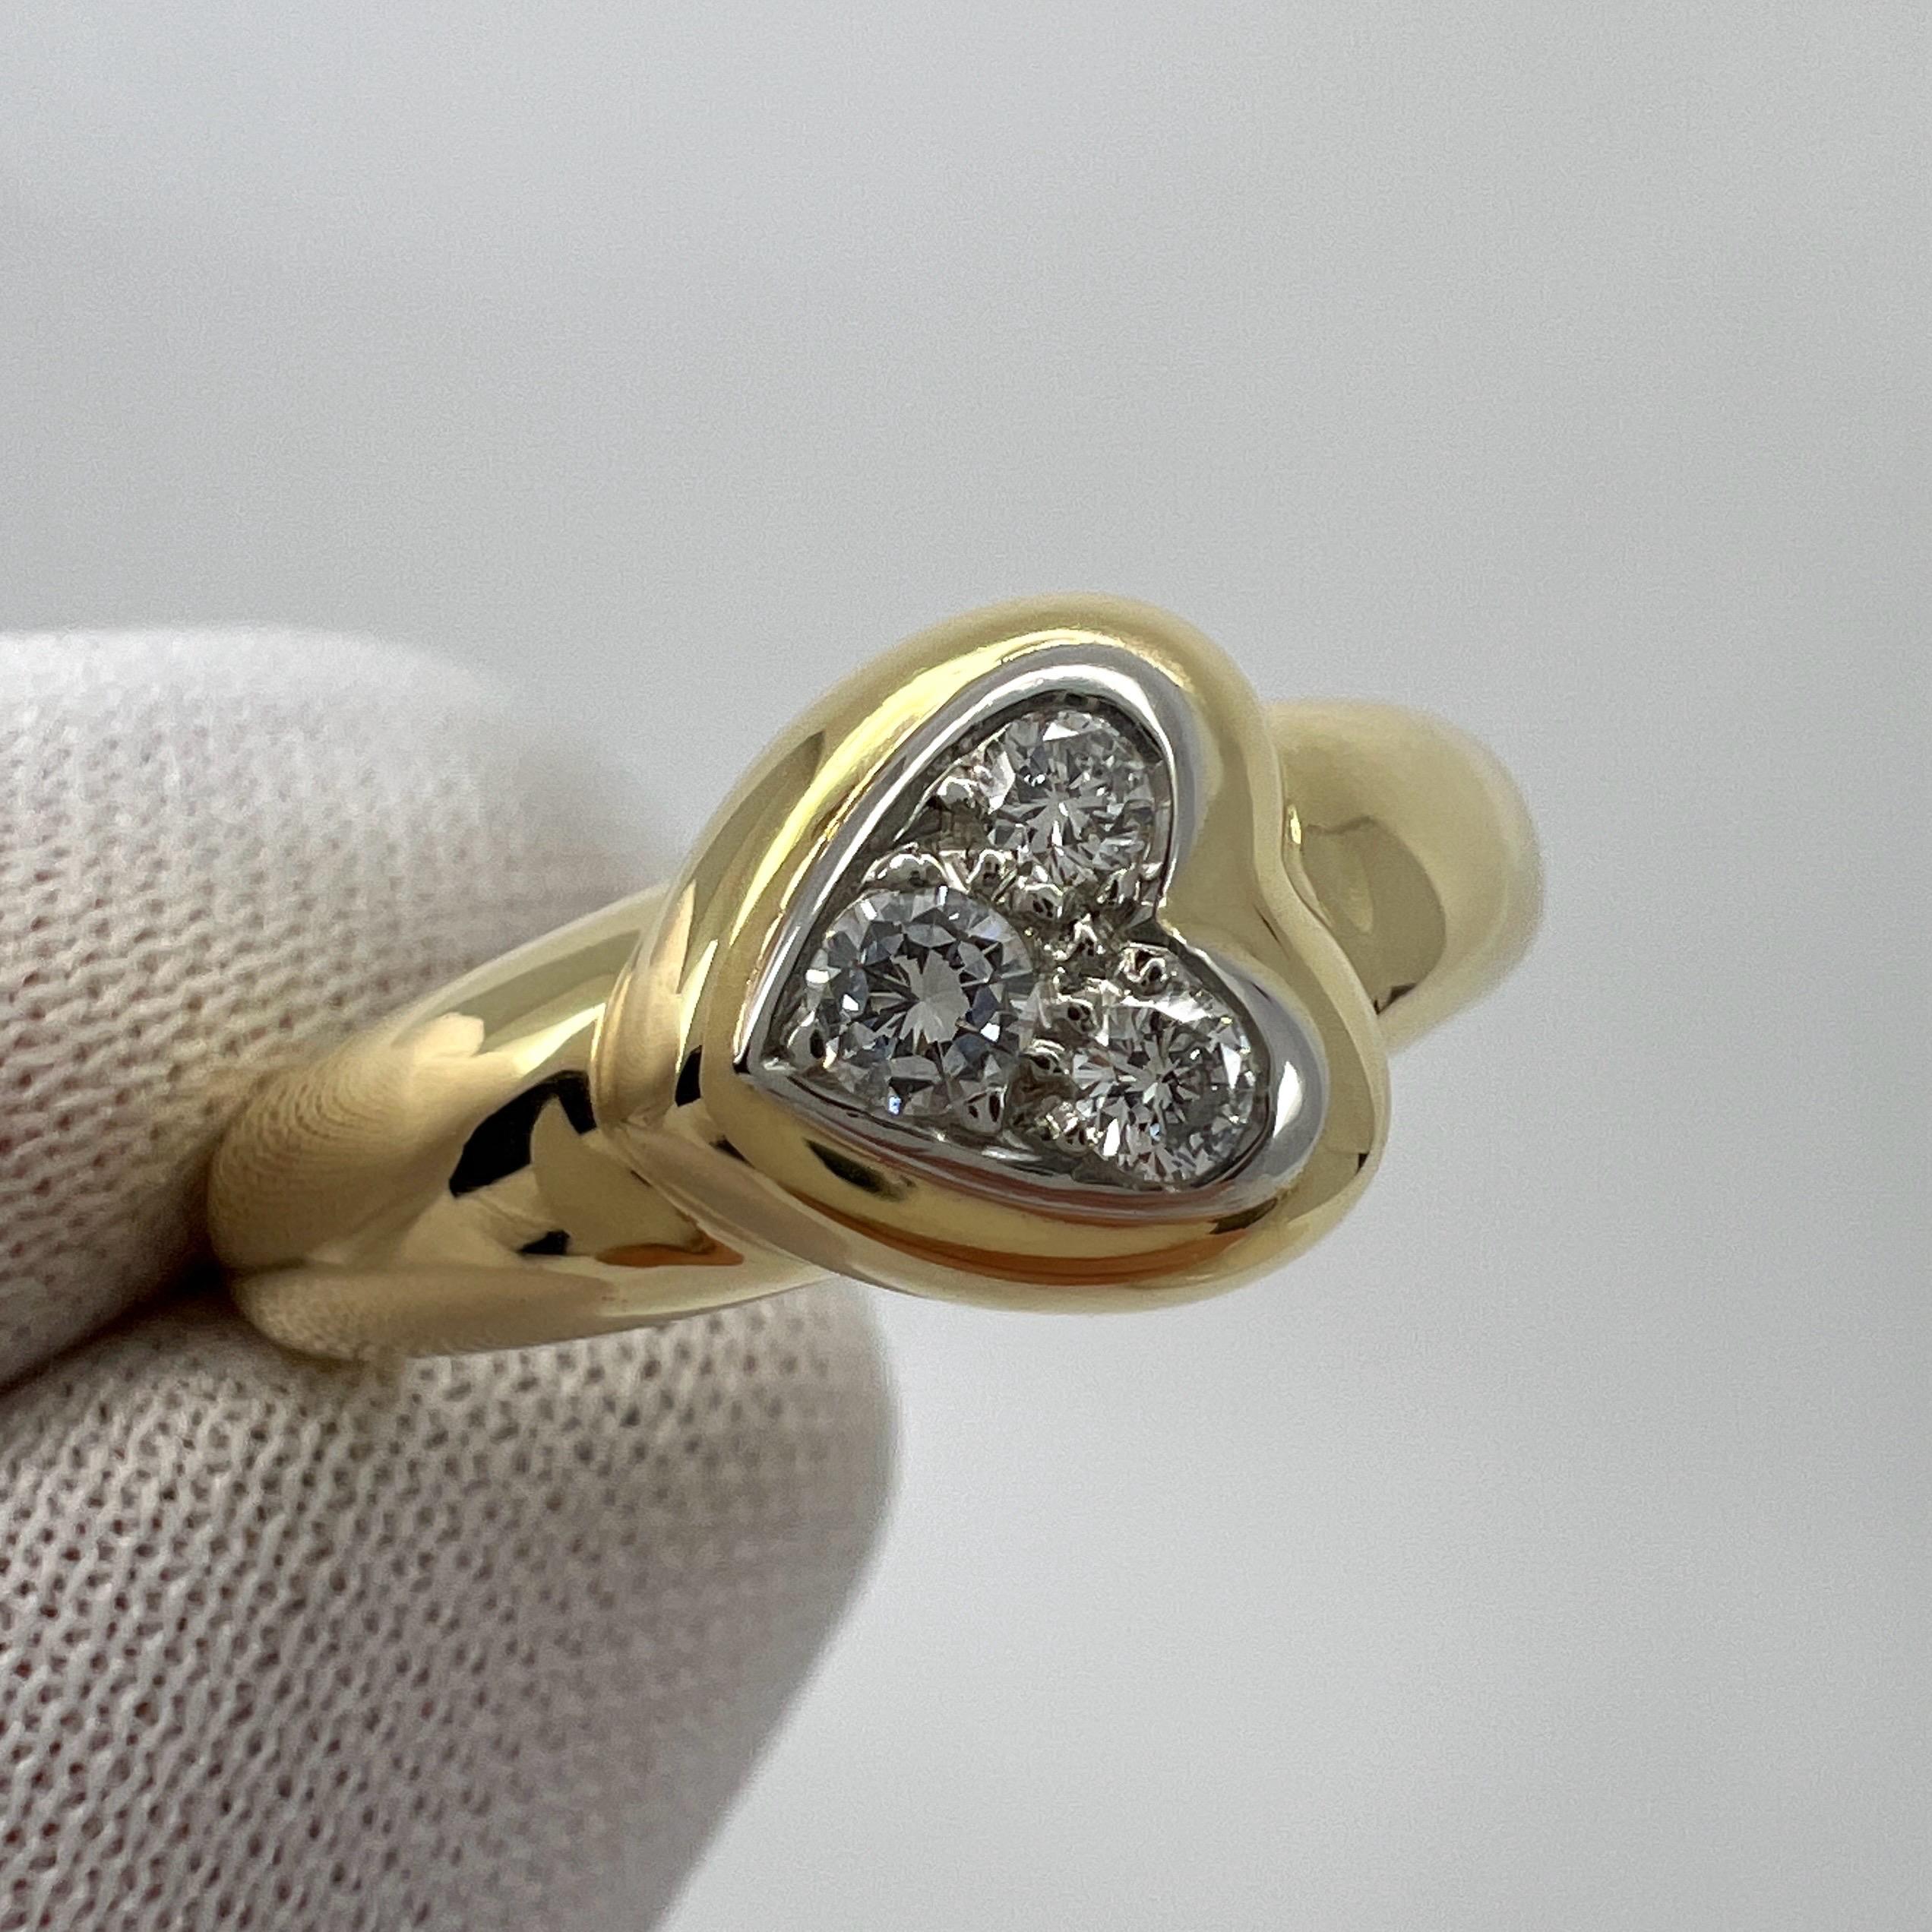 Rare Vintage Van Cleef & Arpels Diamond Heart Dome 18k Yellow Gold Platinum Ring For Sale 4